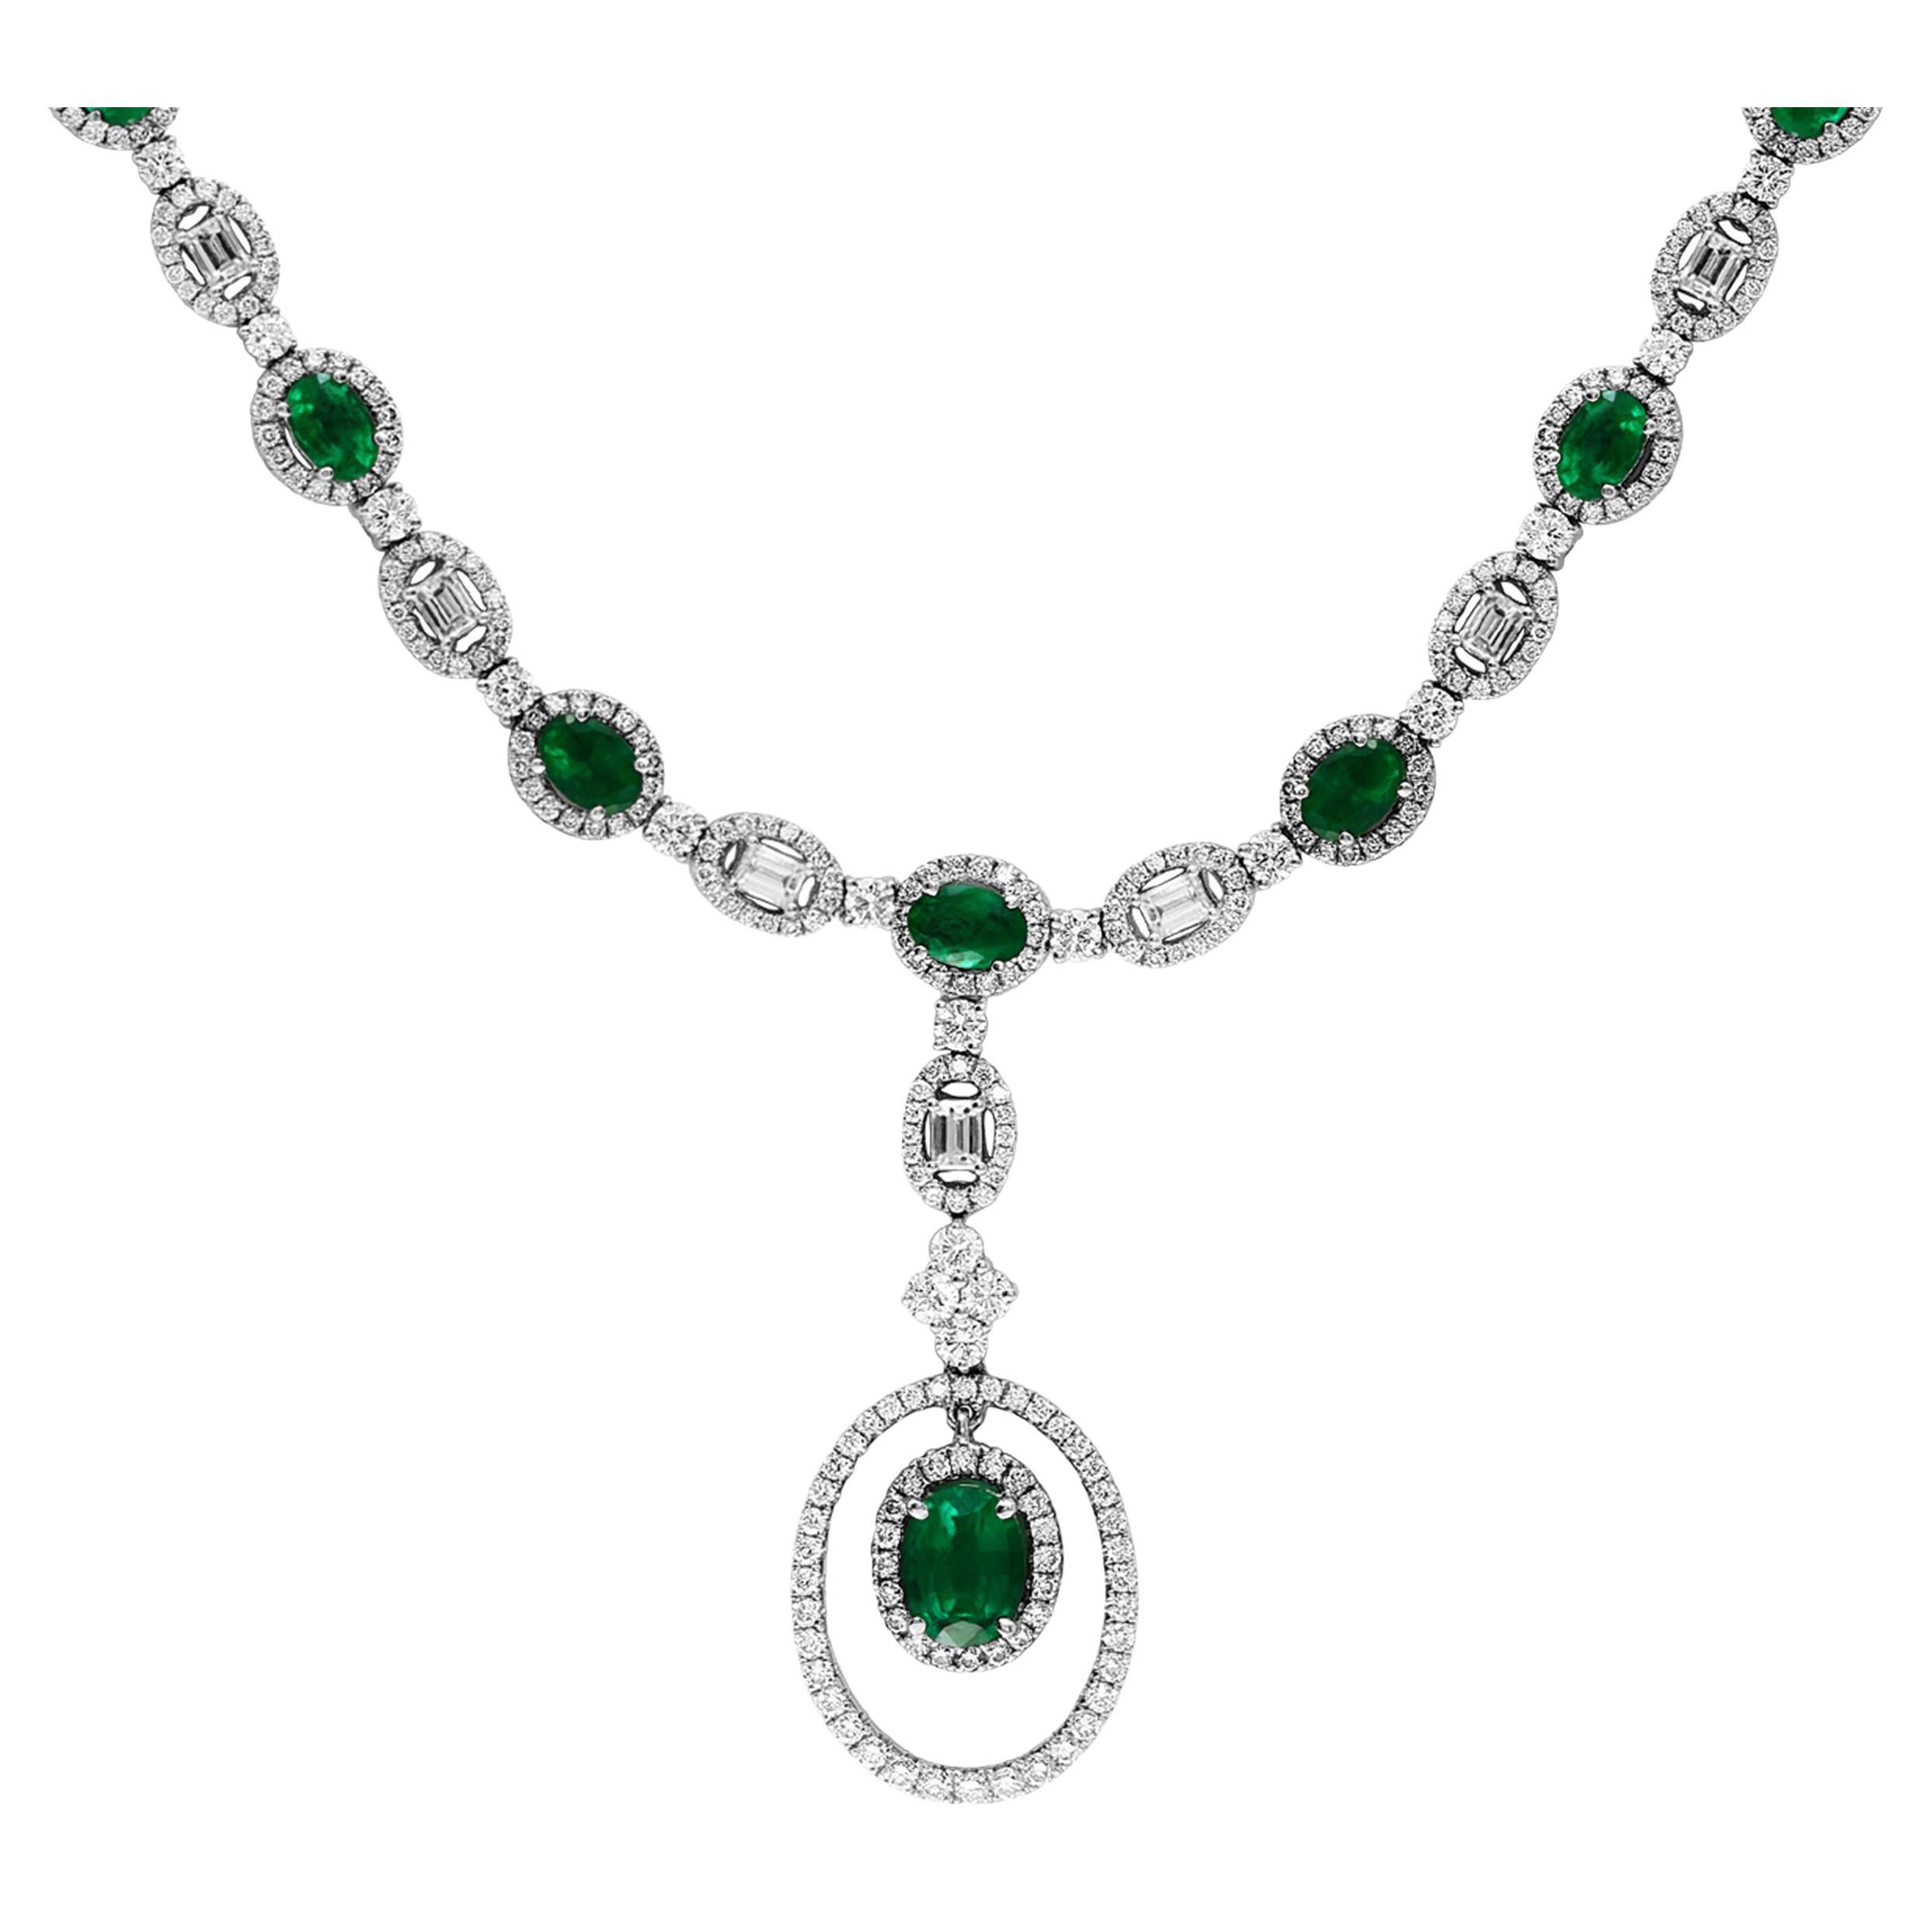 4.21 Carat Oval Cut Emerald and Diamond Necklace in 18 White Gold For Sale